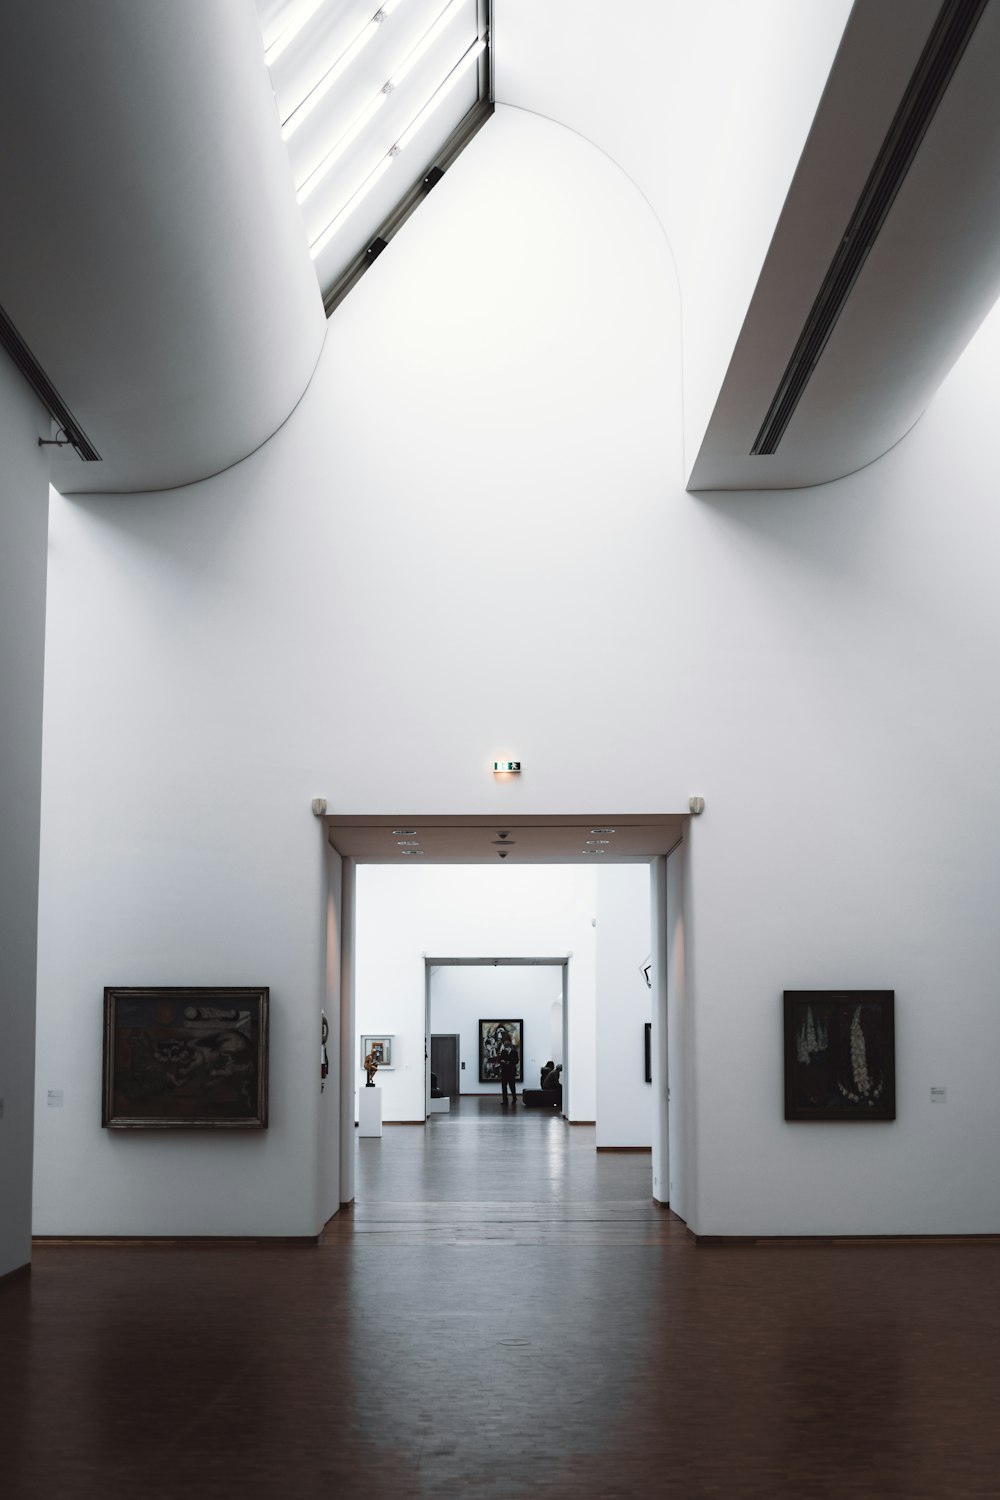 a large white room with paintings on the walls